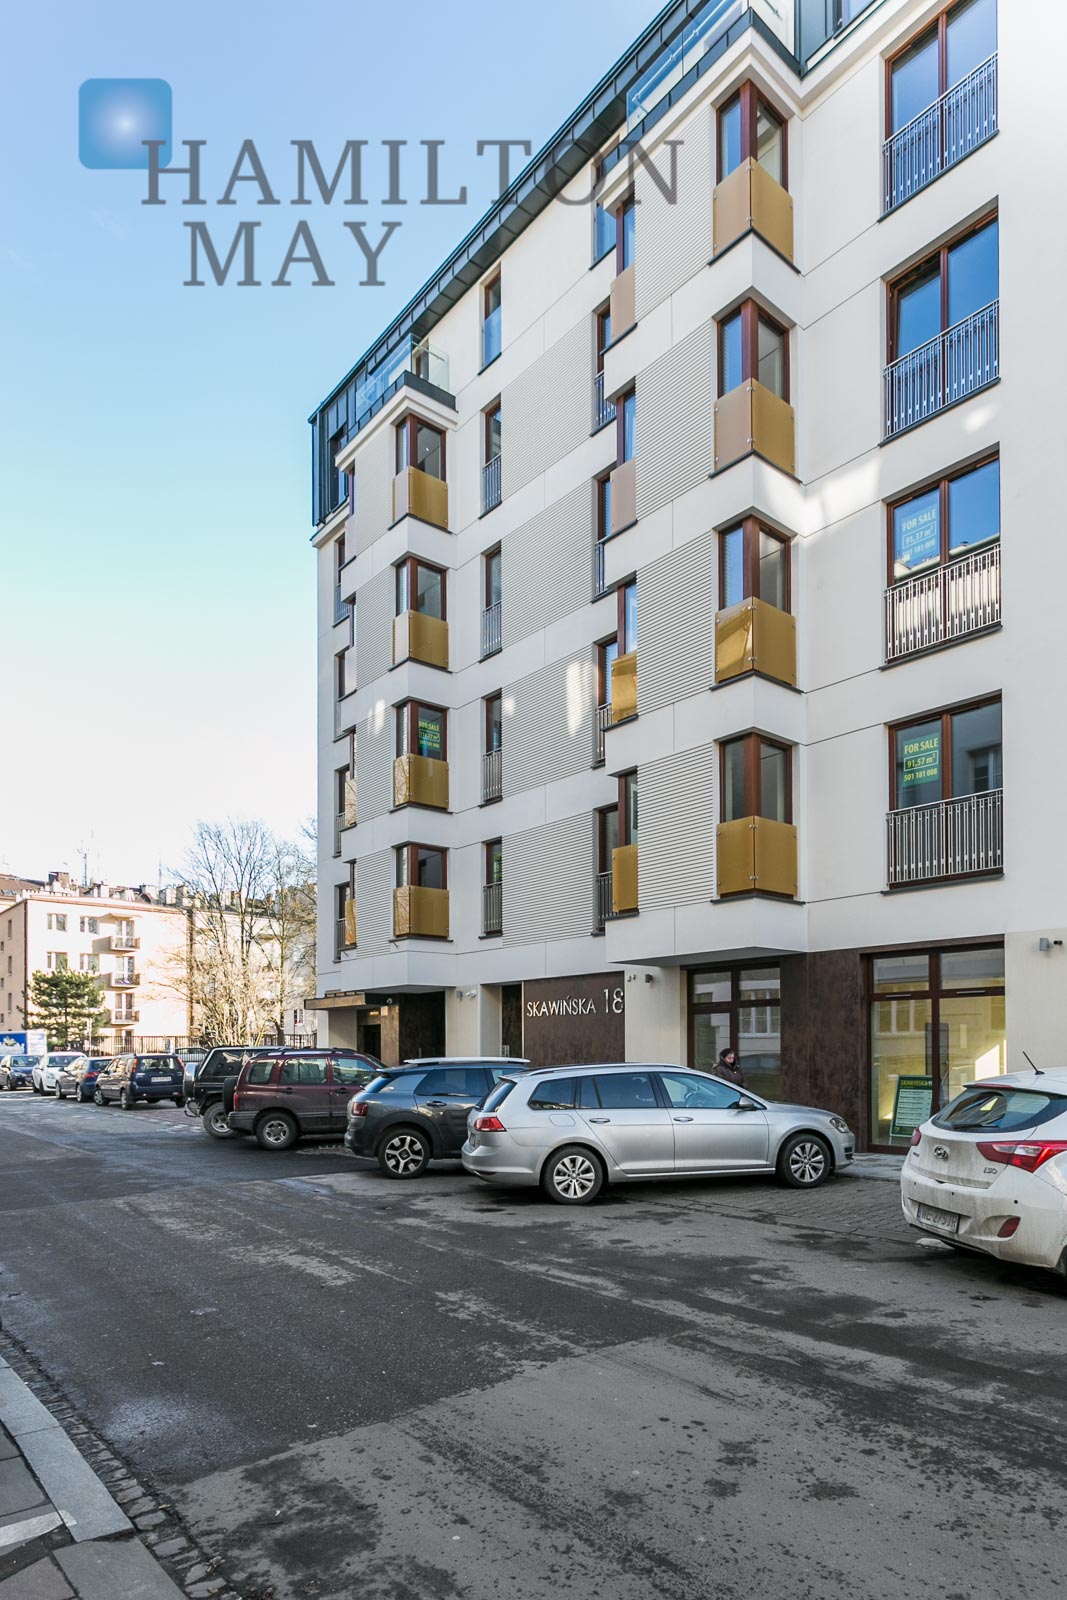 Skawińska 18 Apartments - a modern and intimate residential building